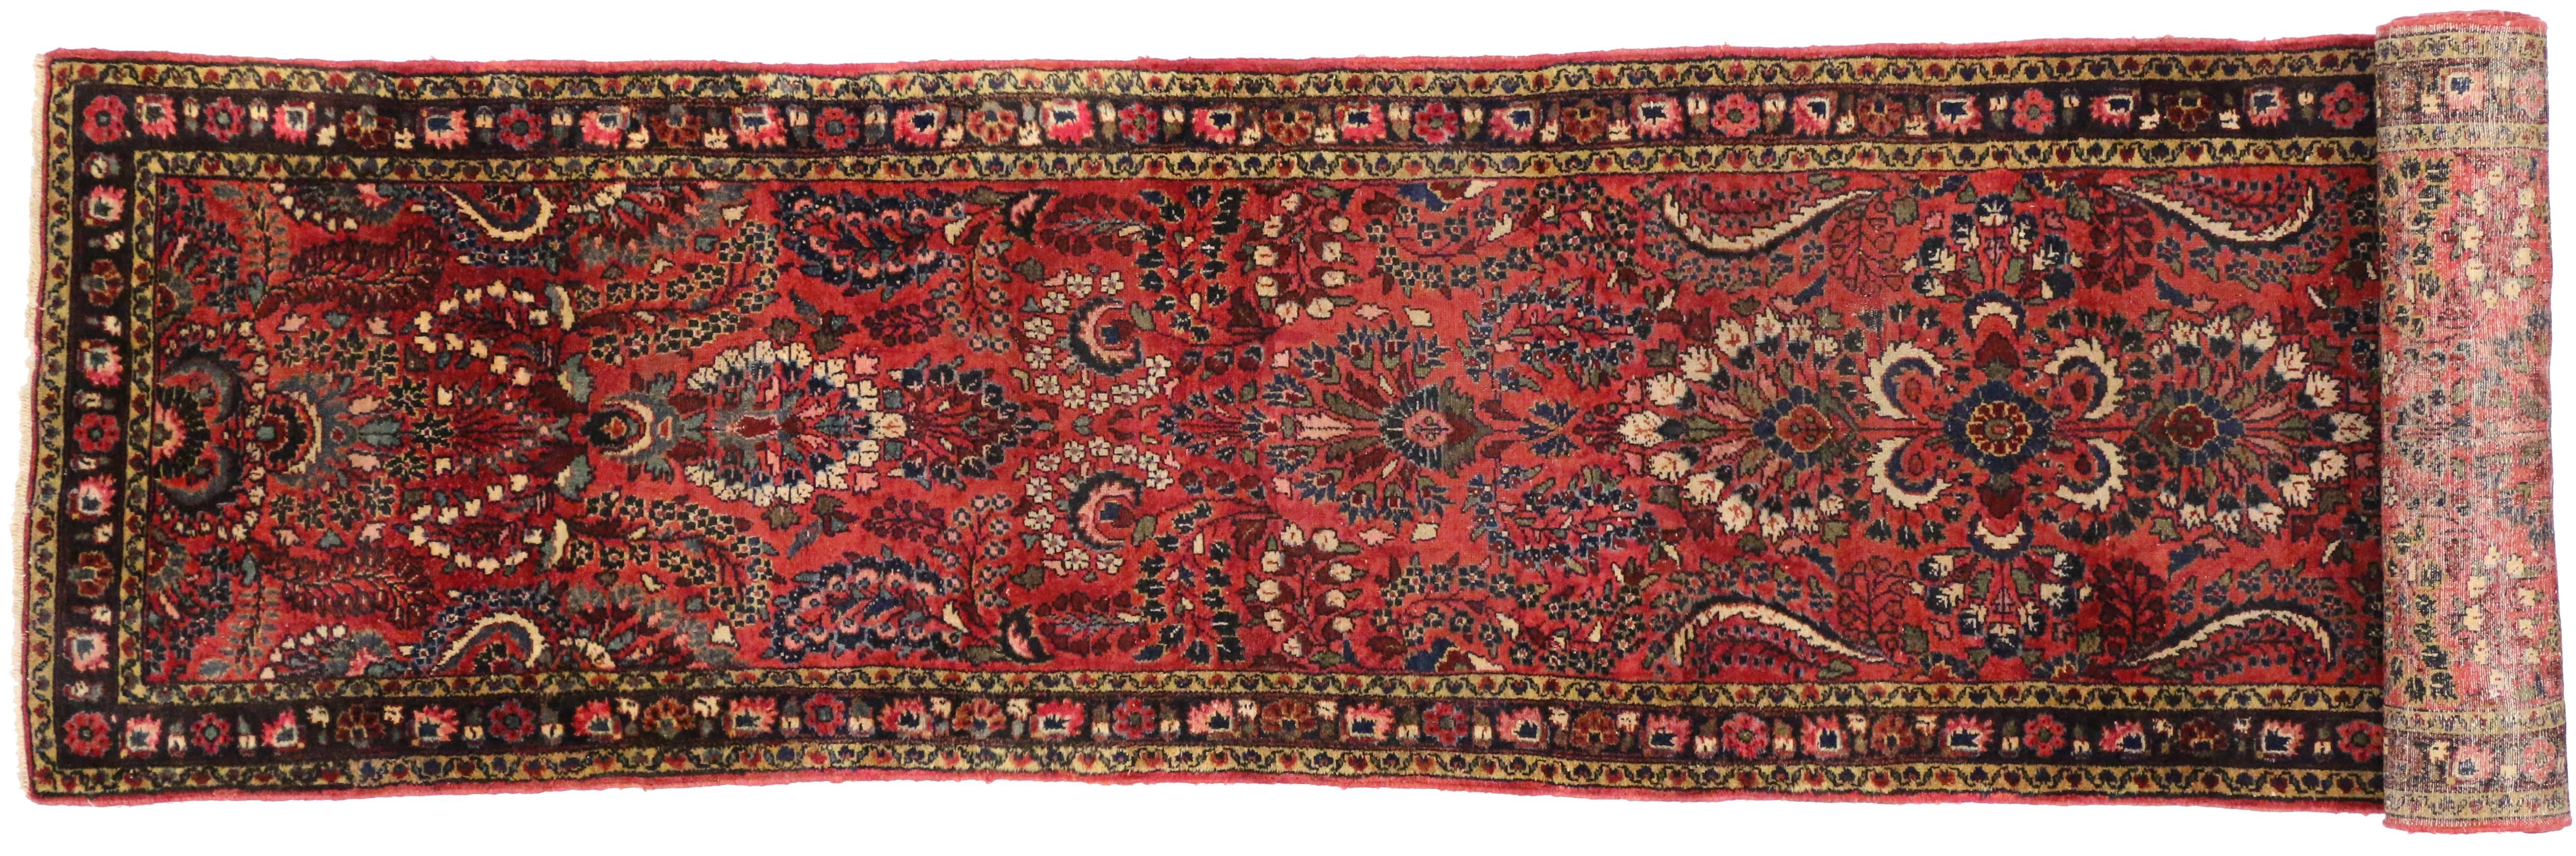 Hand-Knotted Antique Persian Hamadan Runner, Extra-Long Persian Hallway Runner, Sarouk Style For Sale